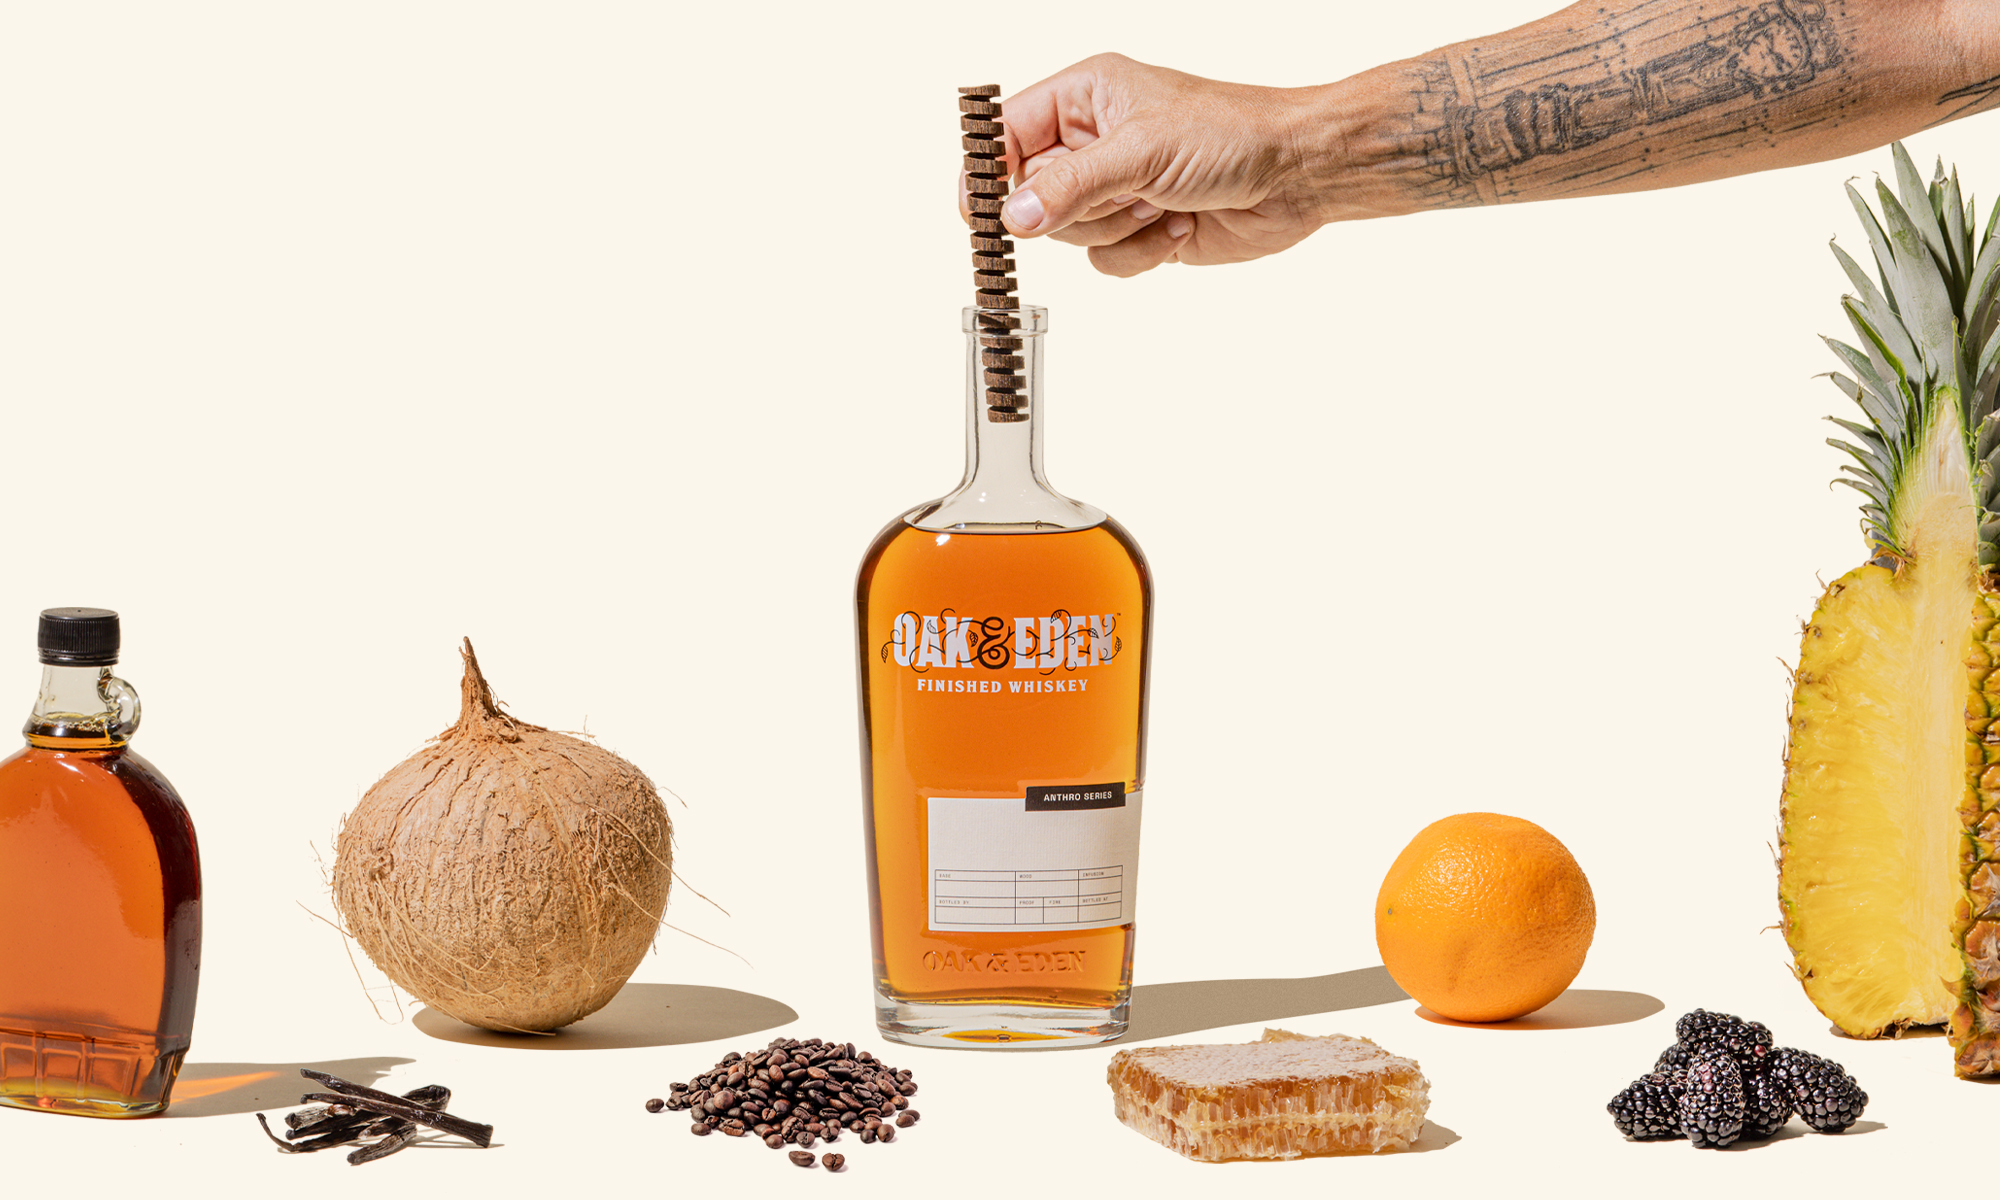 Create Your Own Custom Whiskey With Oak & Eden